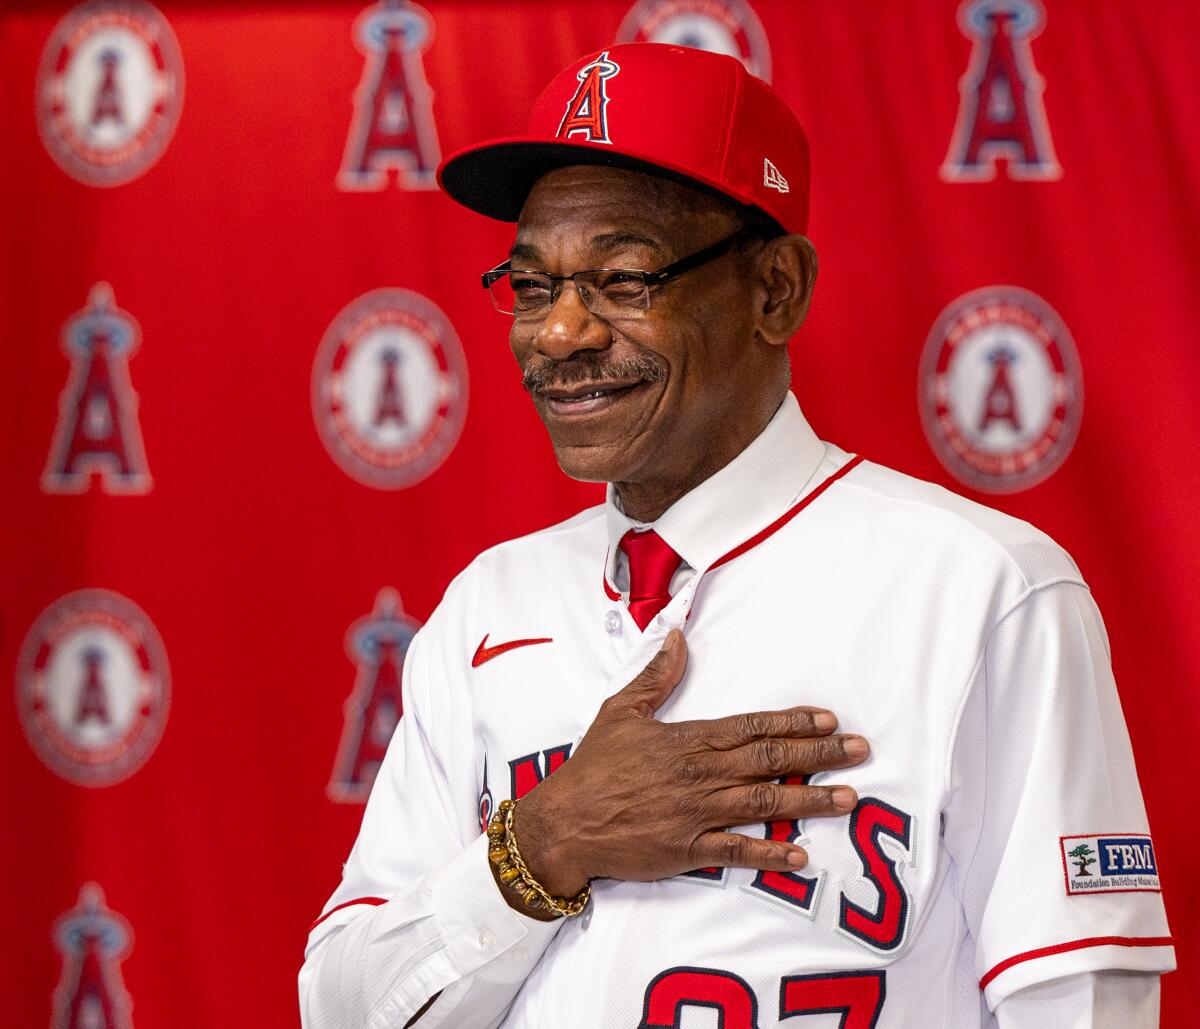 Angels manager Ron Washington places his hand over his heart during an introductory news conference.